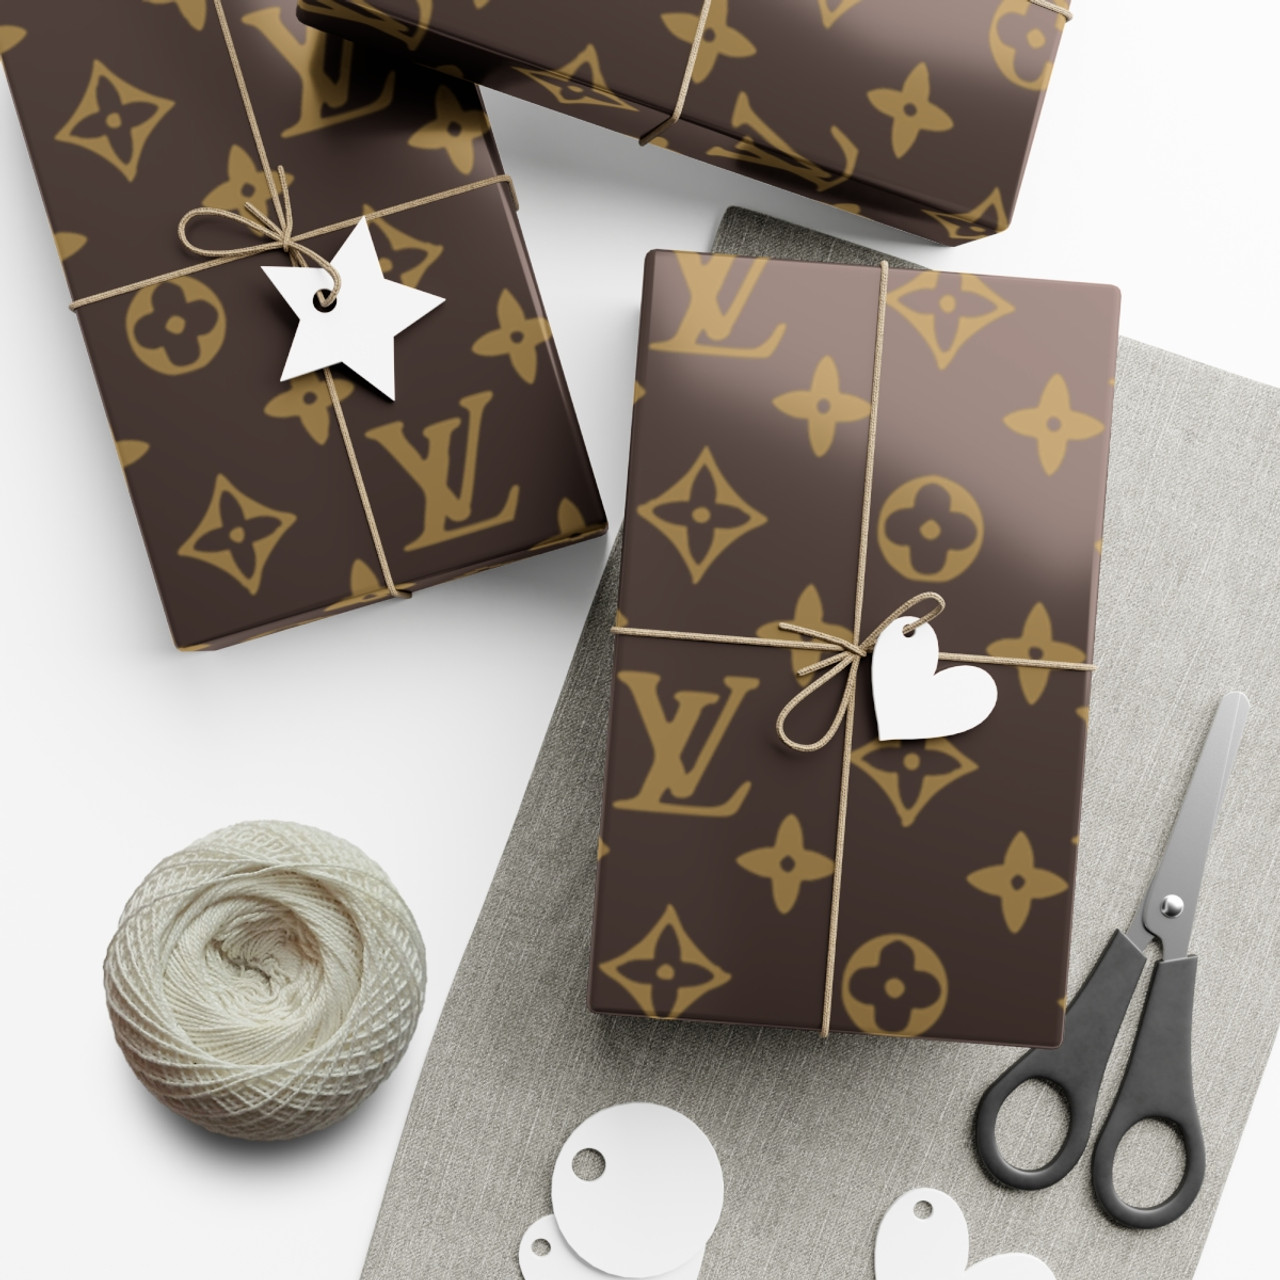 Louis Vuitton Wrapping Paper - luxury gifts unique special diy cyo